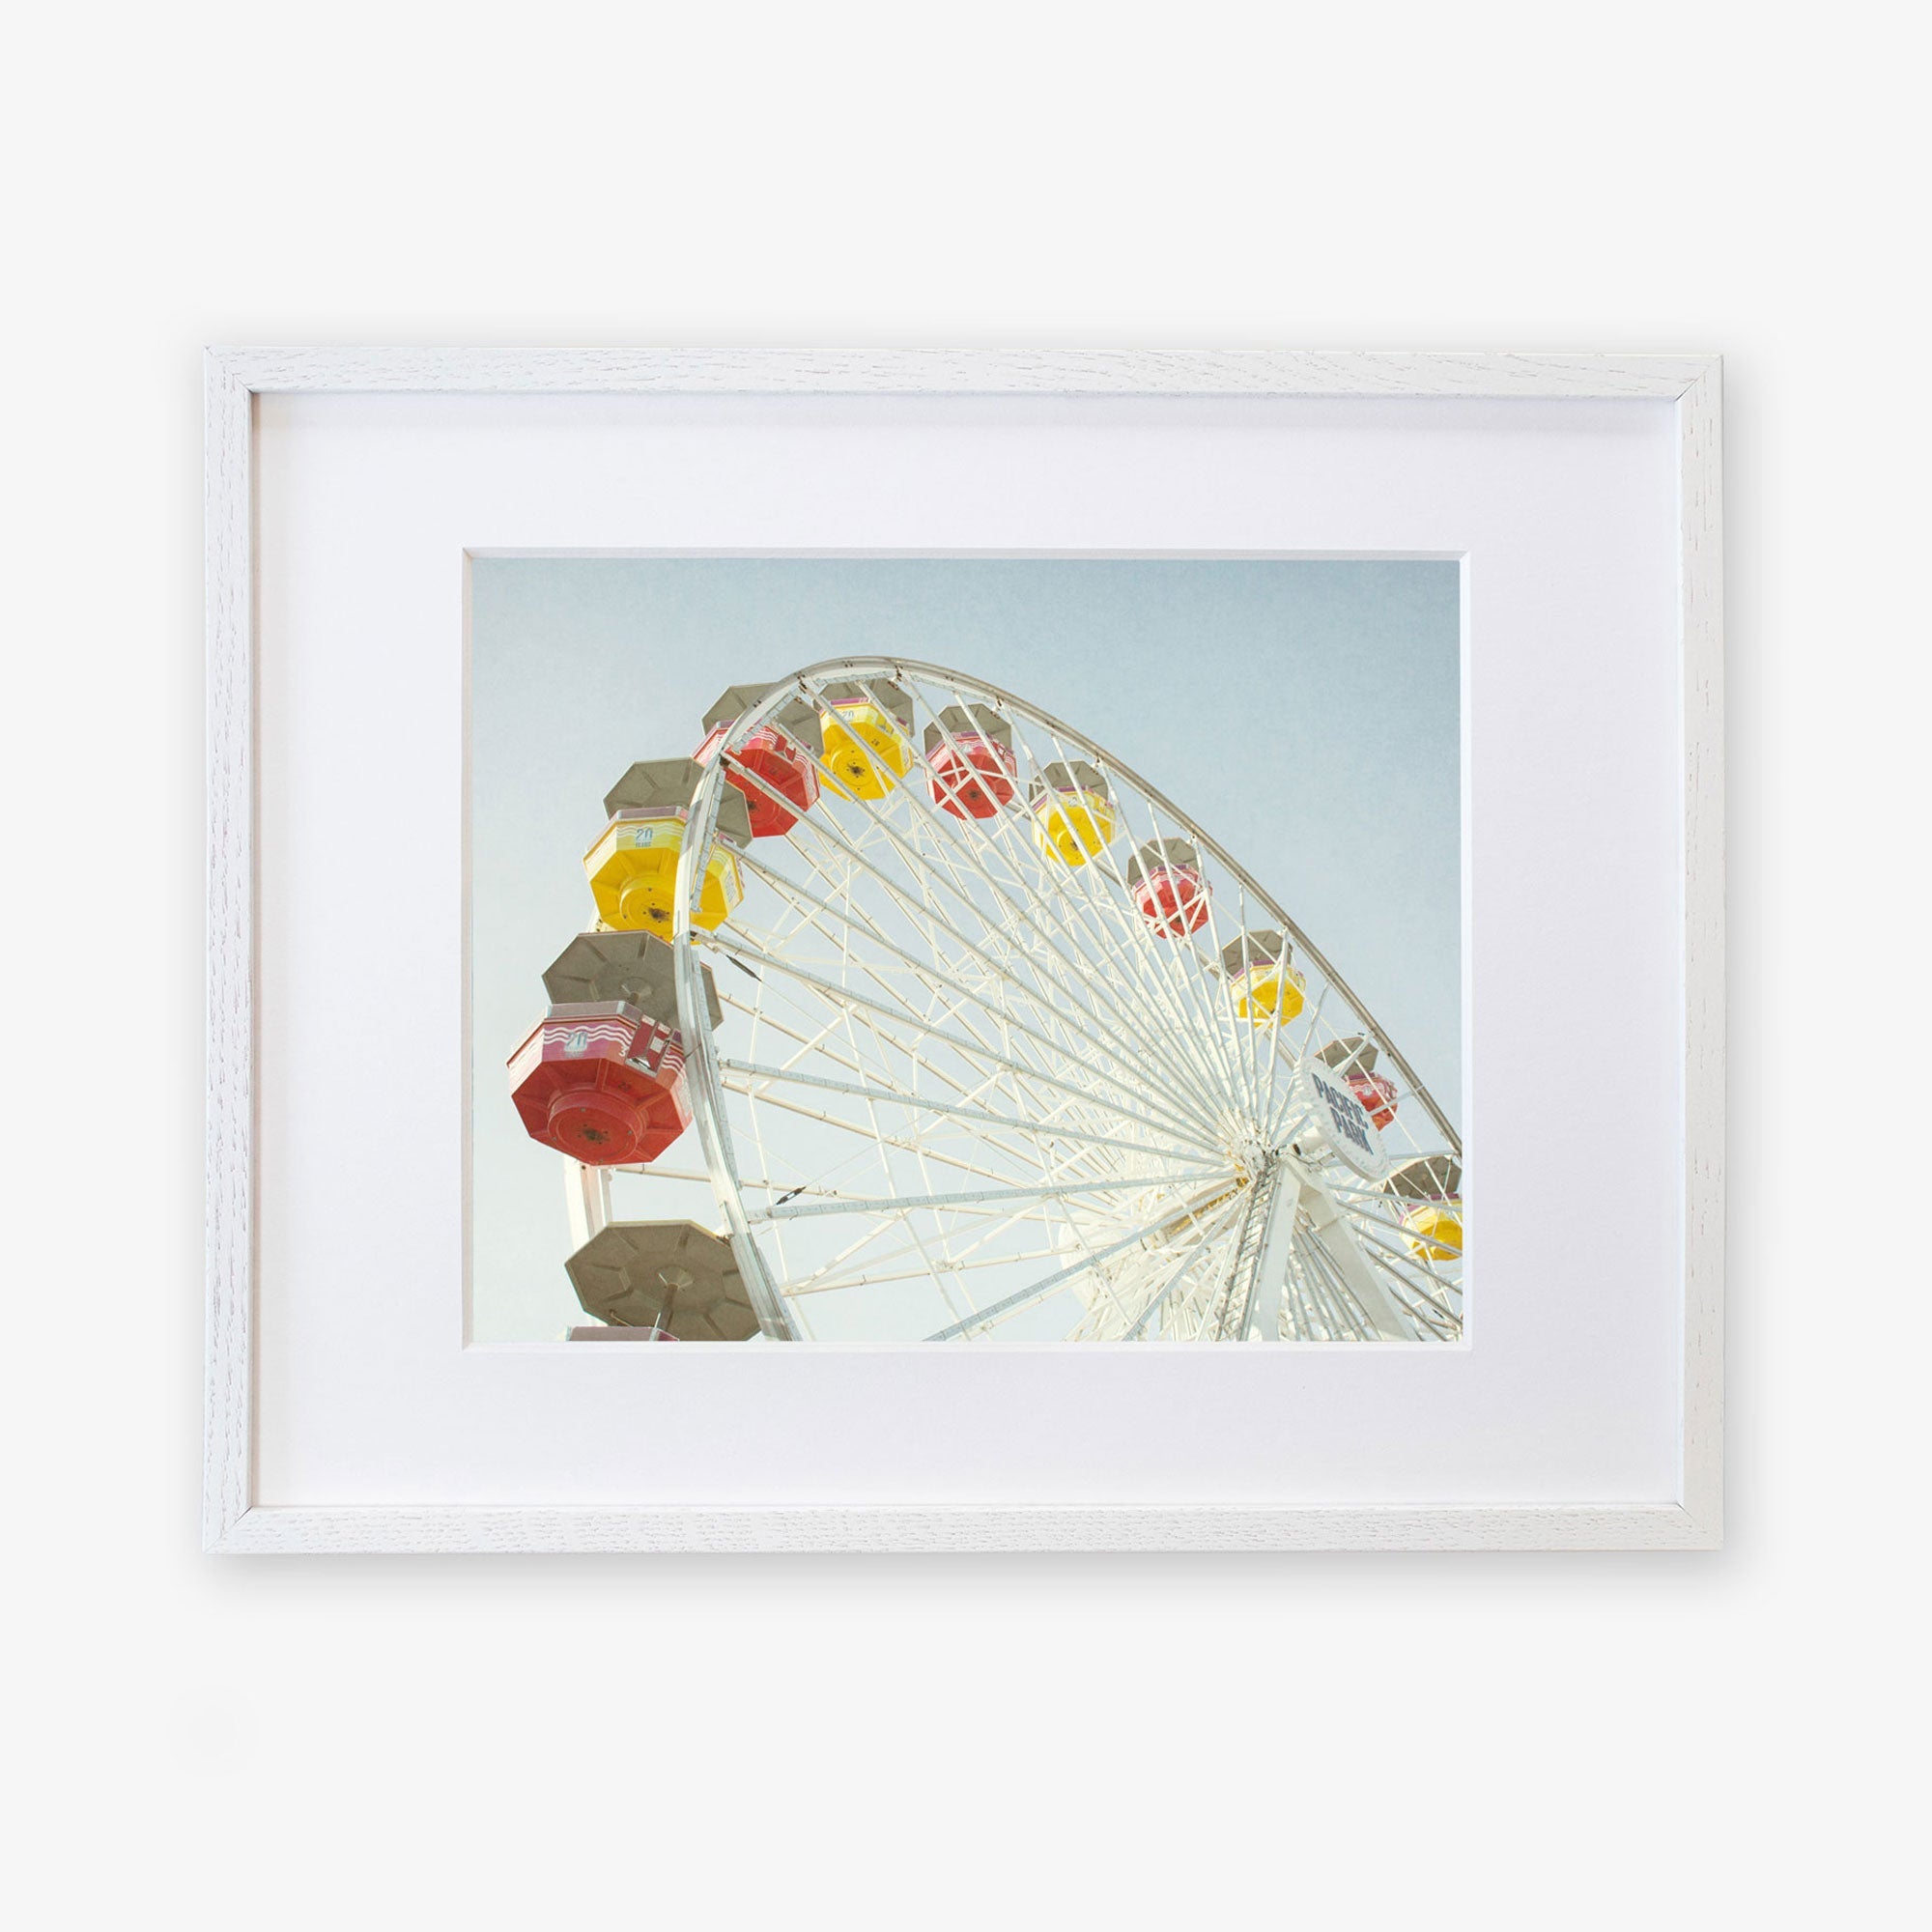 A framed photograph of a colorful Santa Monica Ferris Wheel Print, &#39;Ferris Above&#39; at Santa Monica Pier against a clear sky, displayed within a simple white frame on a white background by Offley Green.